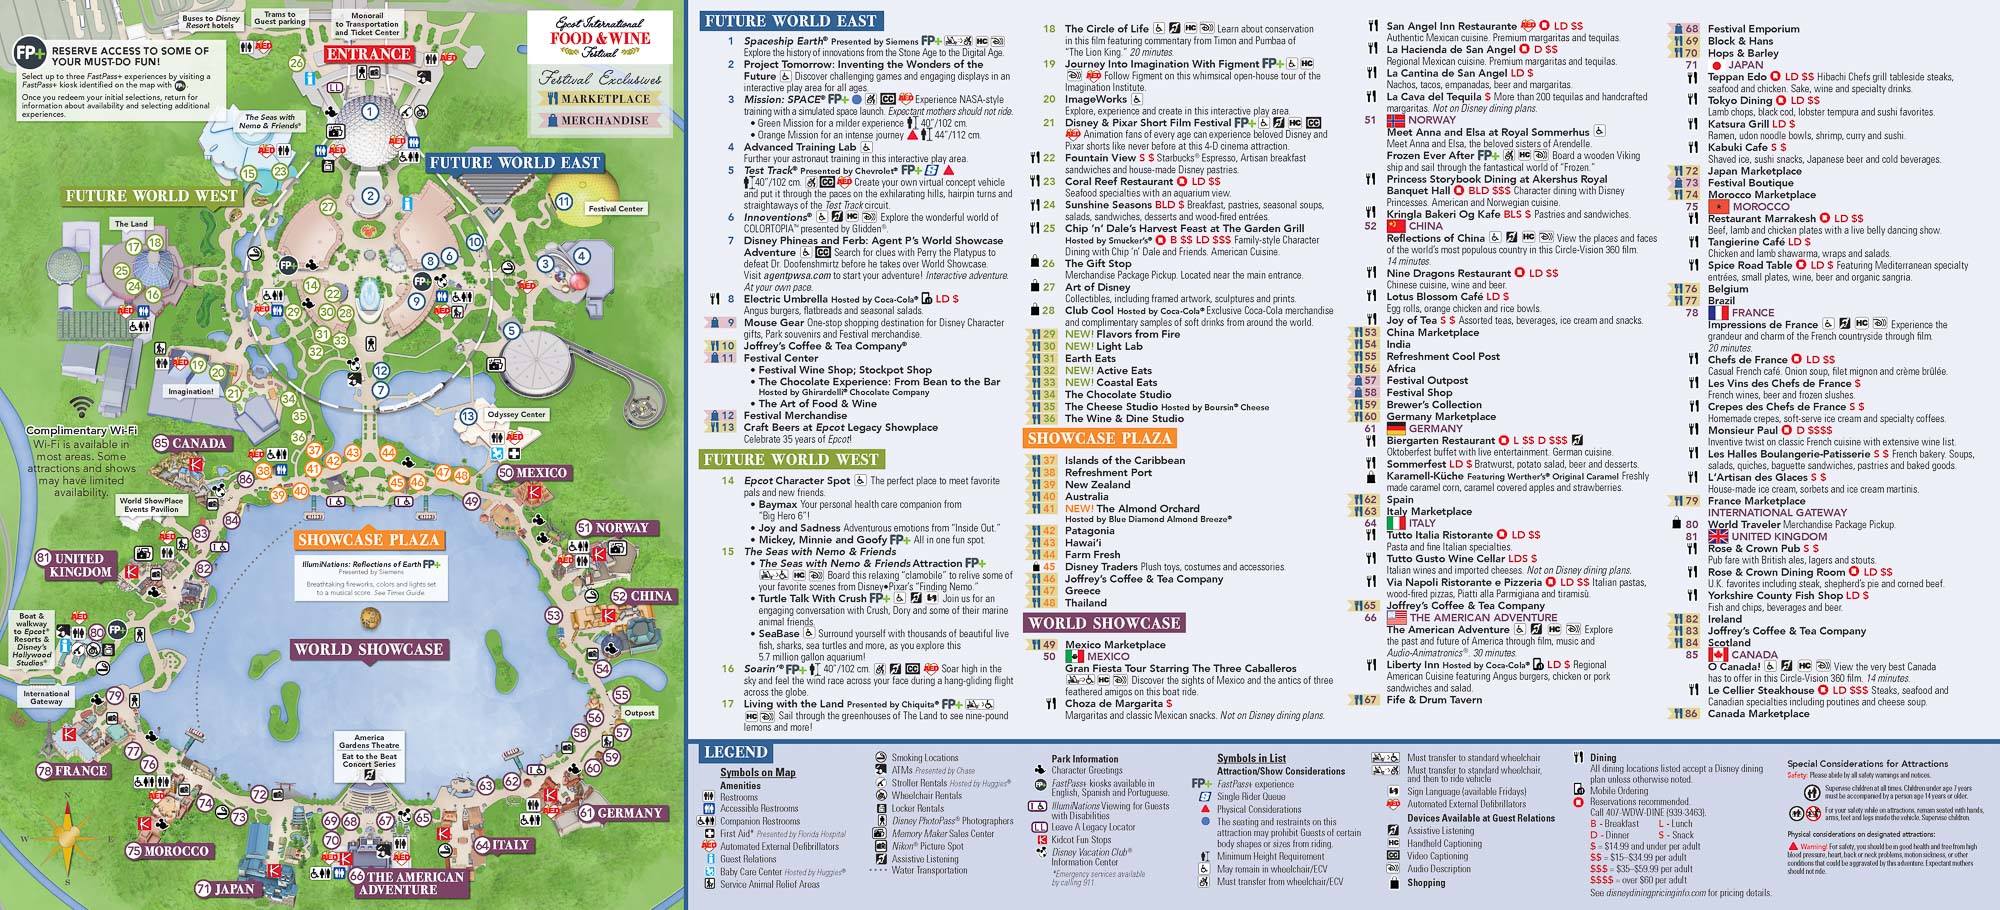 The 2017 Epcot International Food & Wine Festival Guidemap is Here!